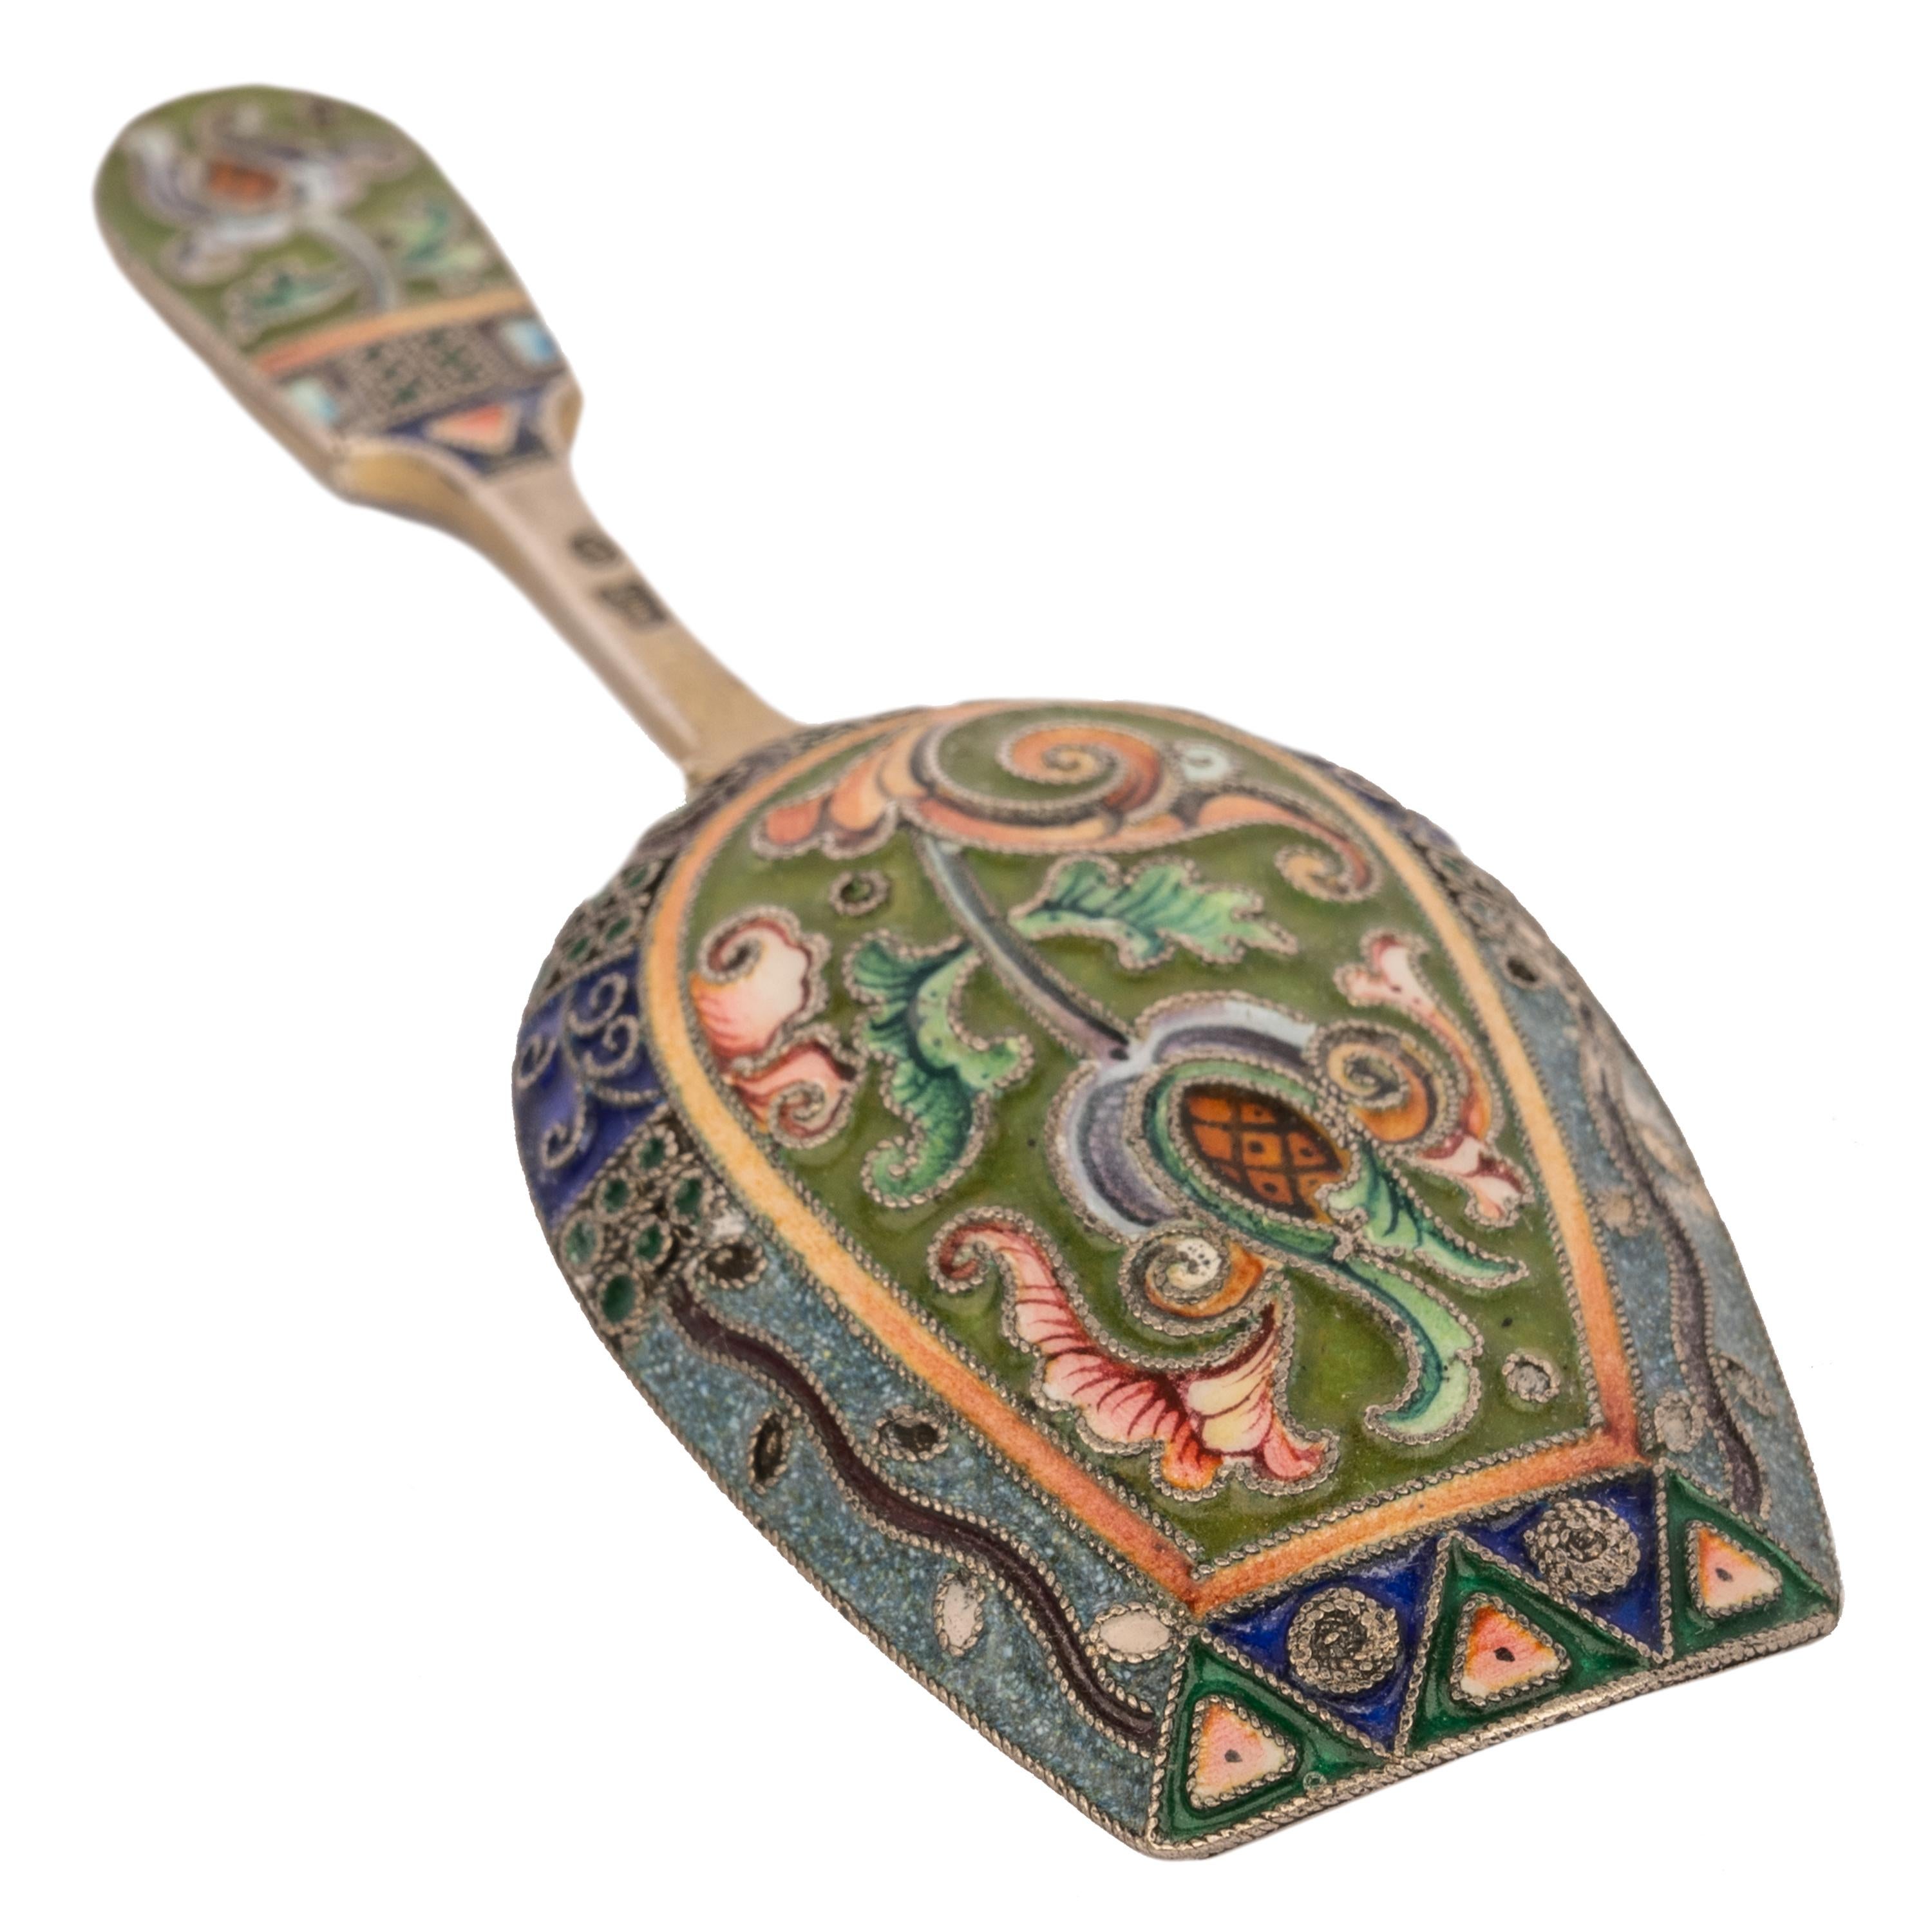 Antique Imperial Russian Silver Gilt Cloisonné Shovel Caddy Spoon Moscow, 1908 In Good Condition For Sale In Portland, OR